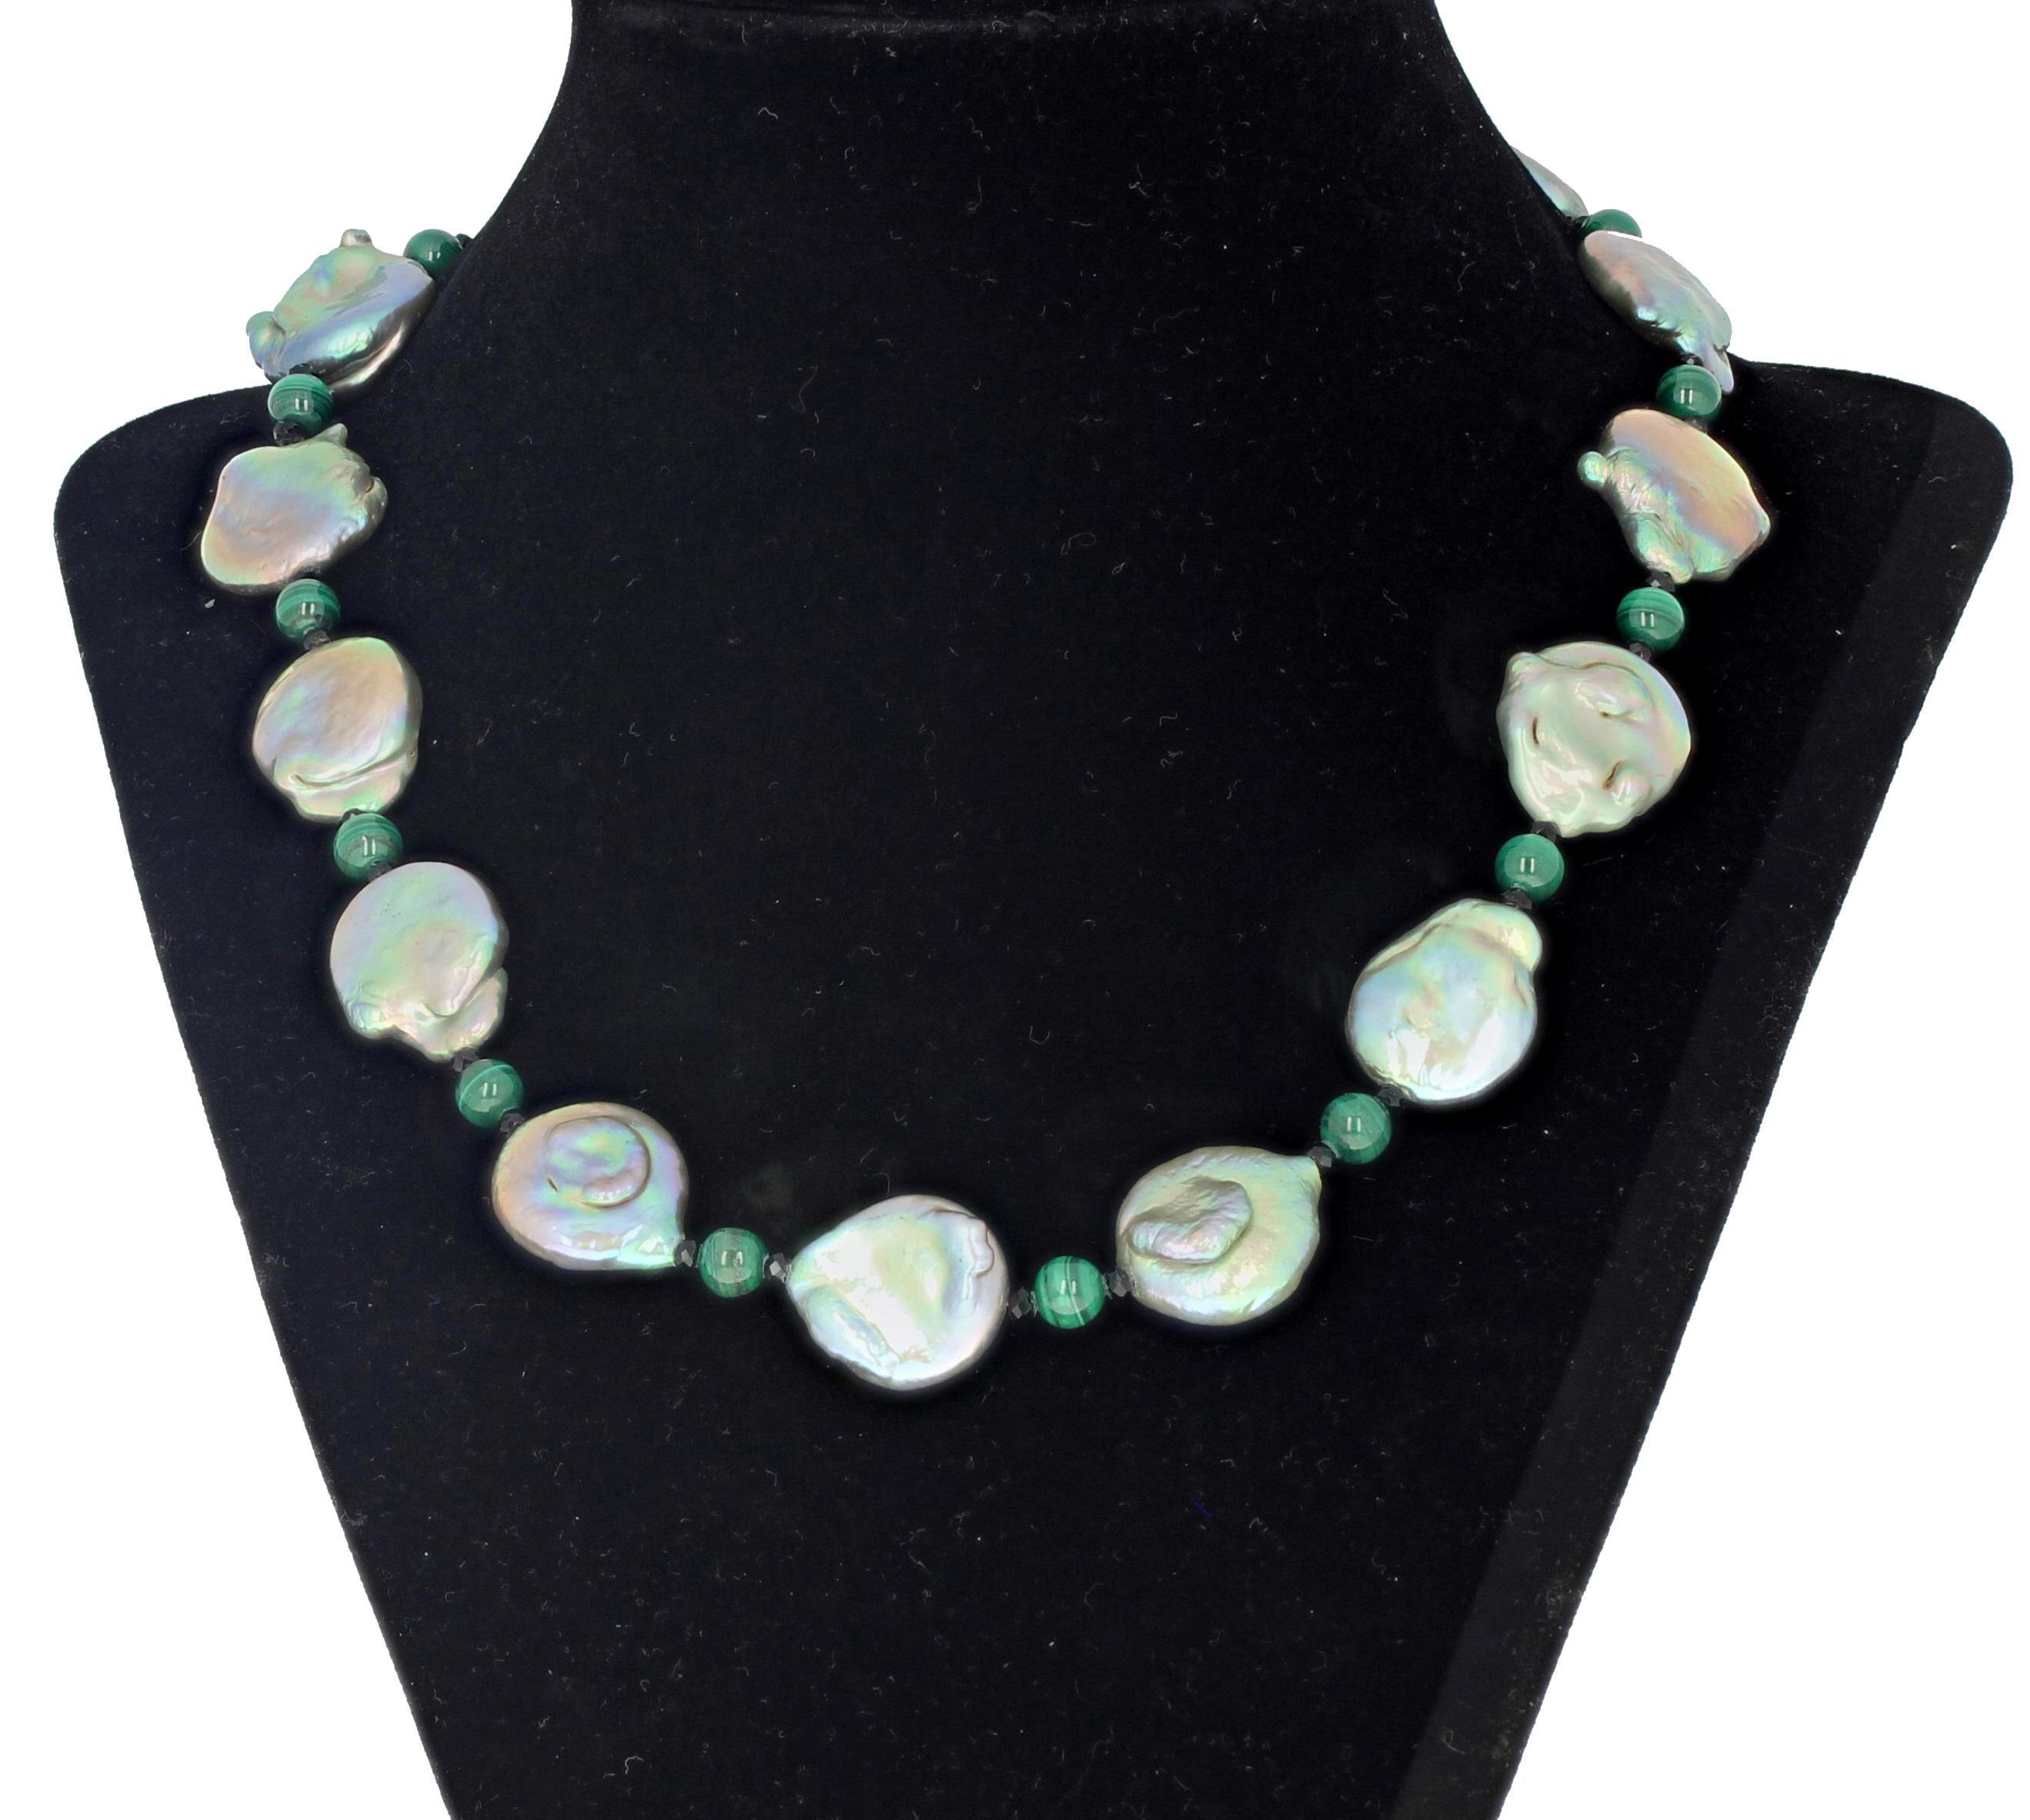 Glowing elegant multi color (almost fiery) unique 17mm Coin Pearls enhanced with natural green Malachite and REAL NATURAL Spinel handmade necklace 17 inches long set with a sterling silver clasp. 